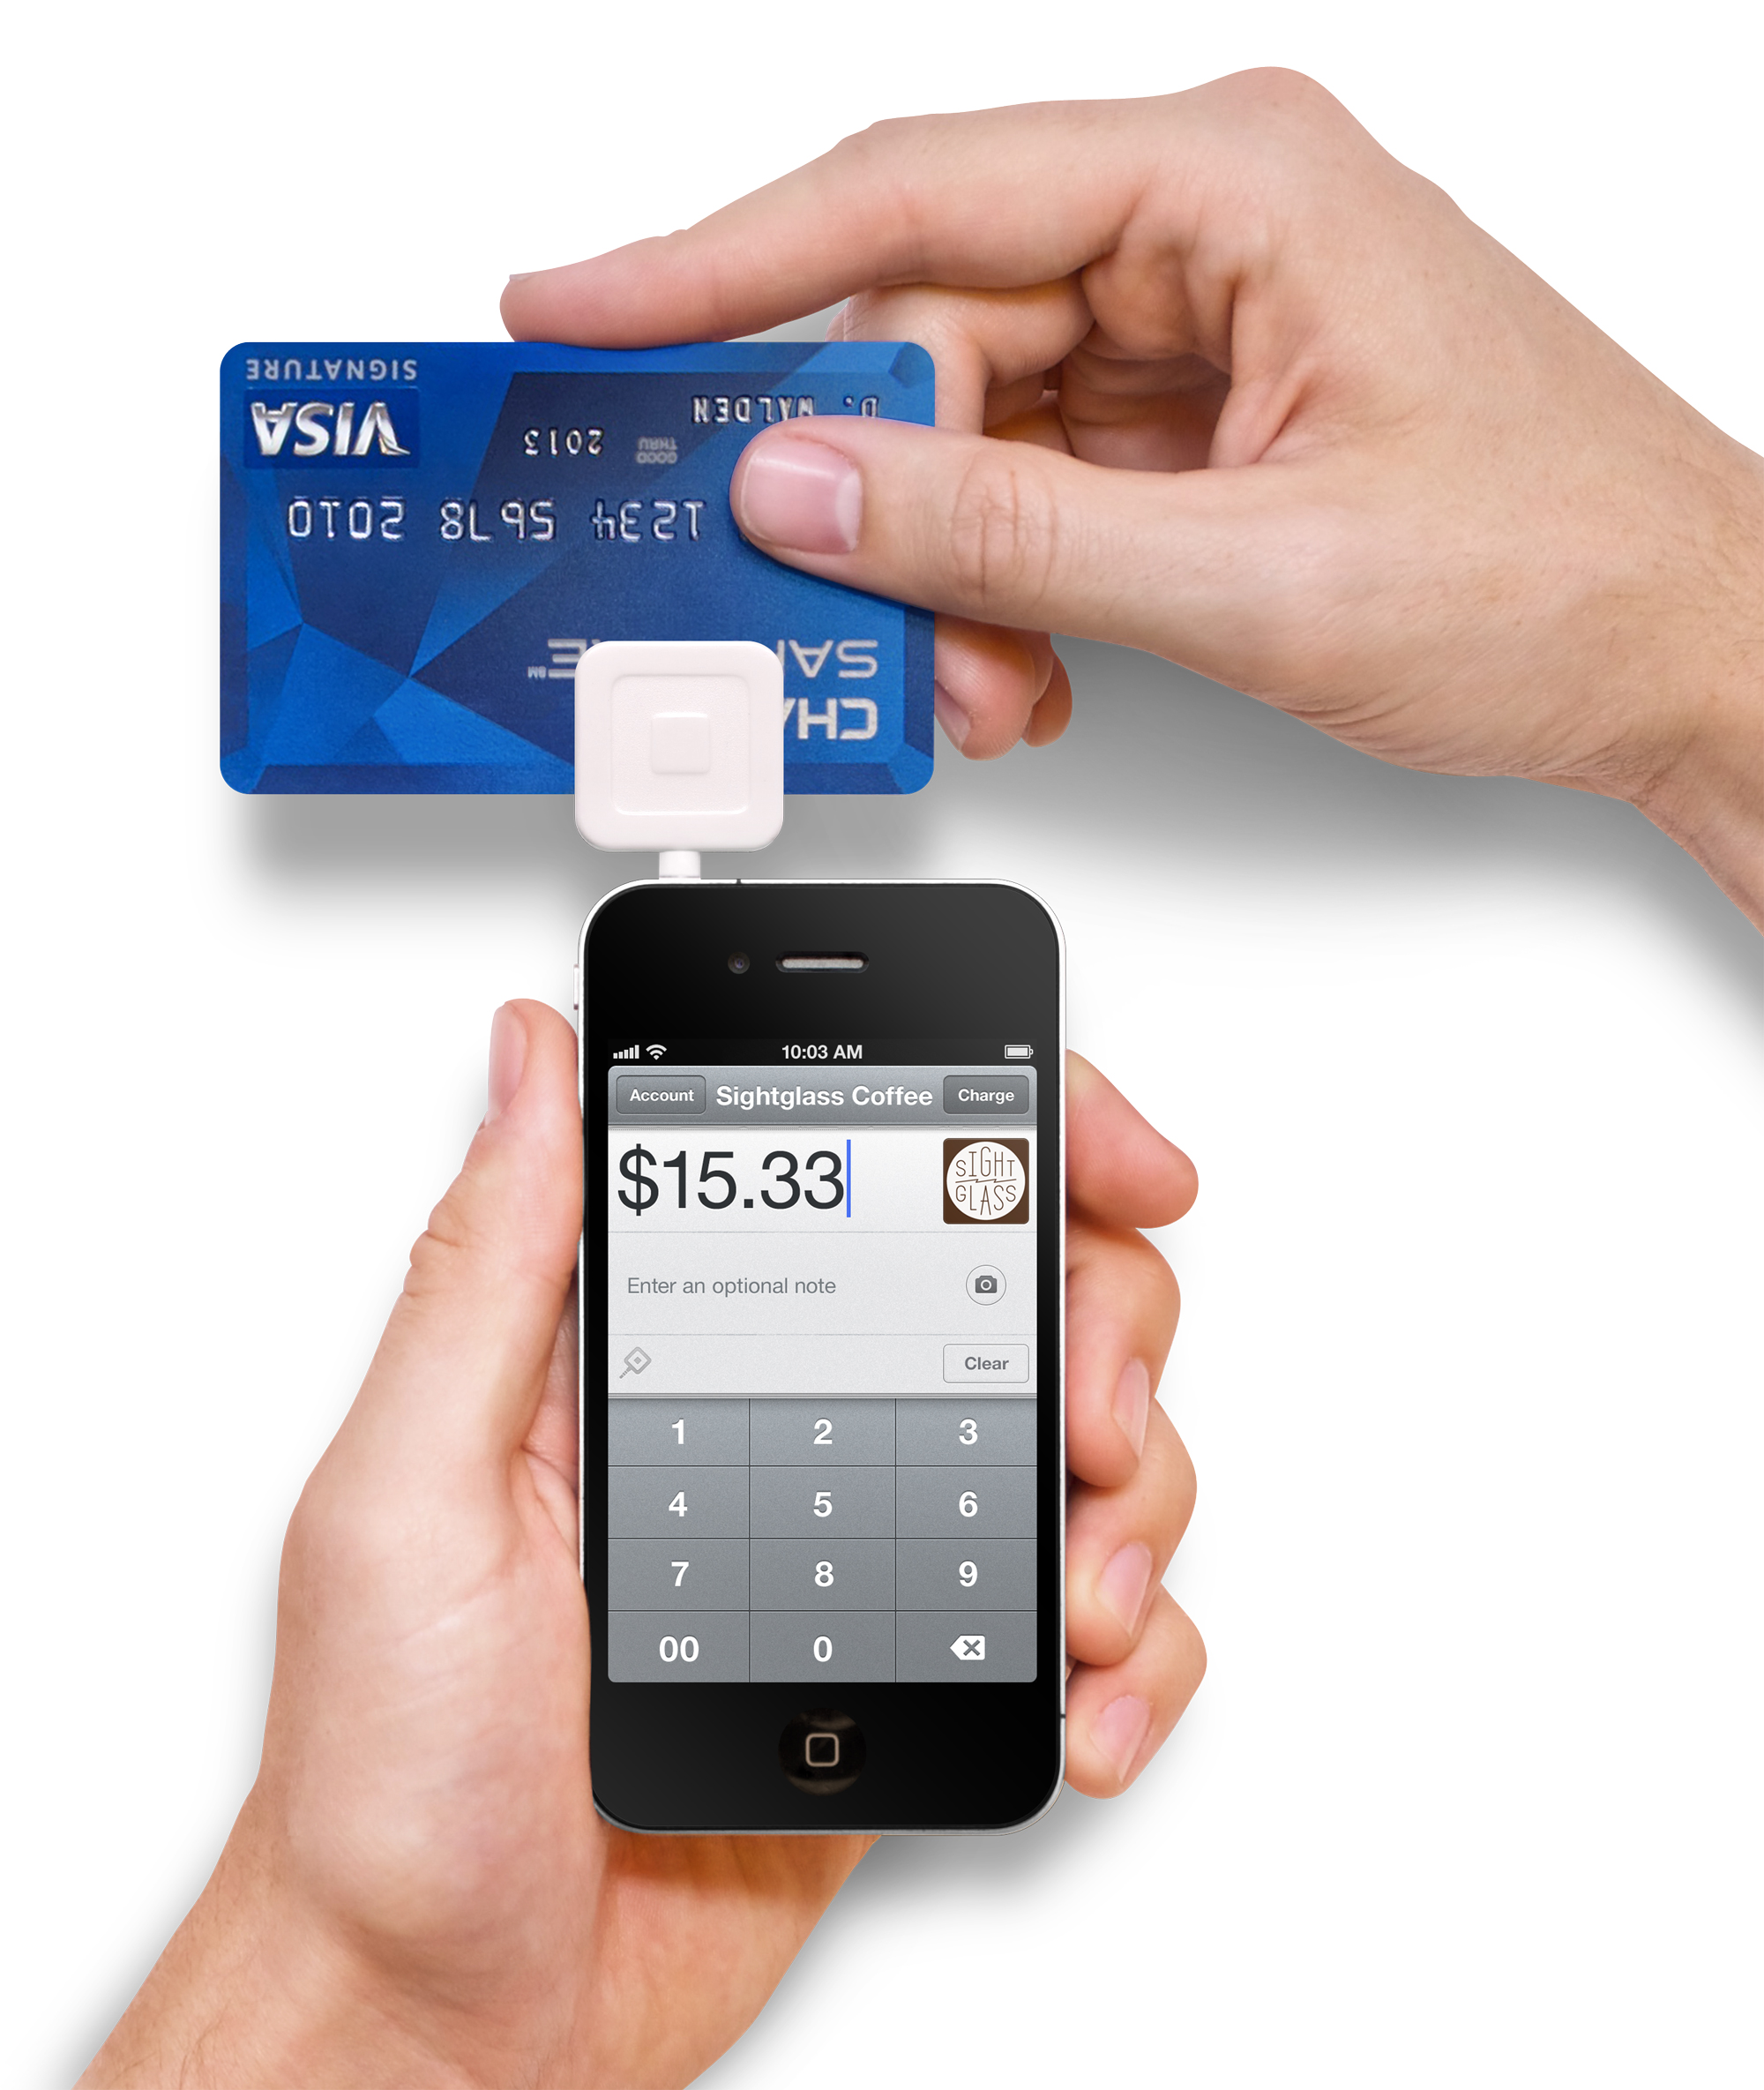 A new way to accept credit cards